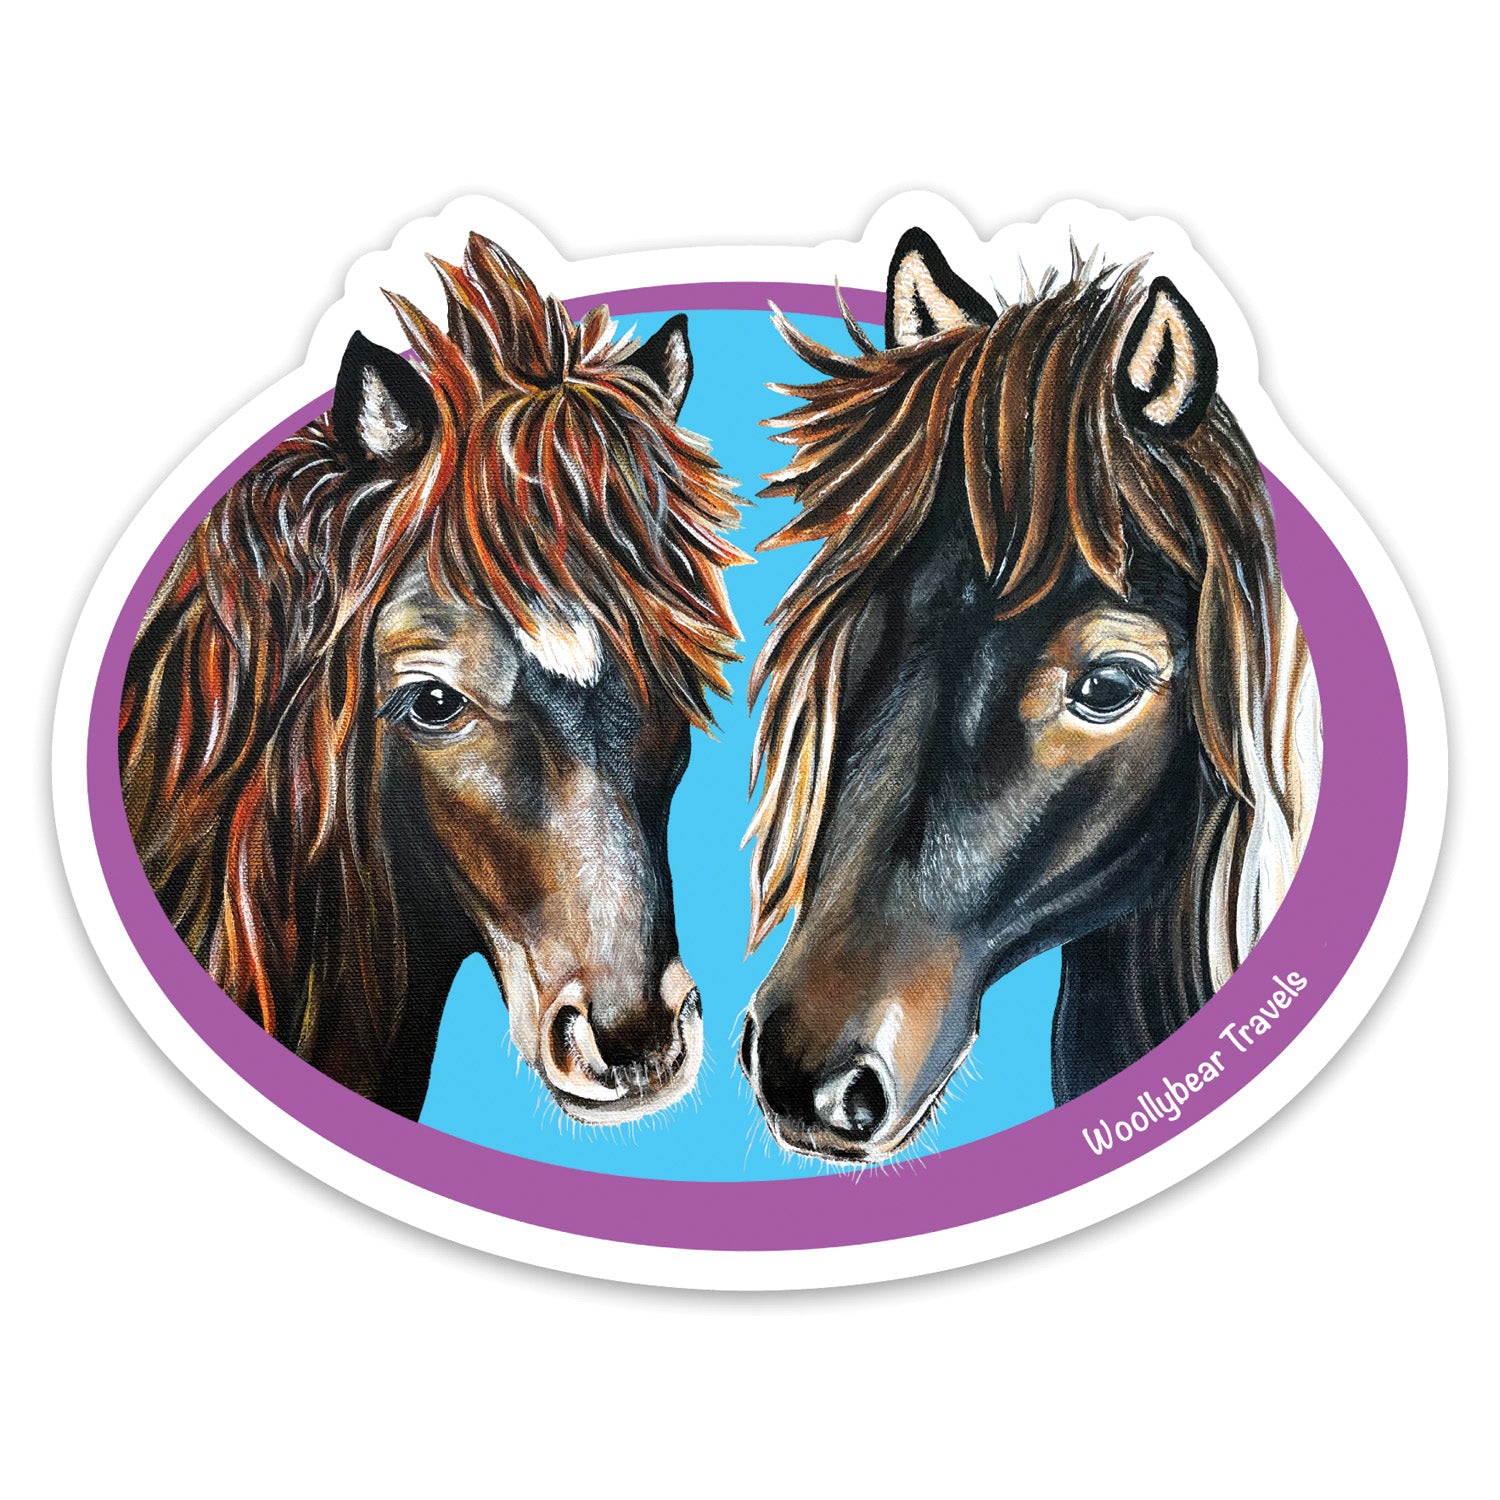 Miniature Horses Sticker – Felicity and Wildfire